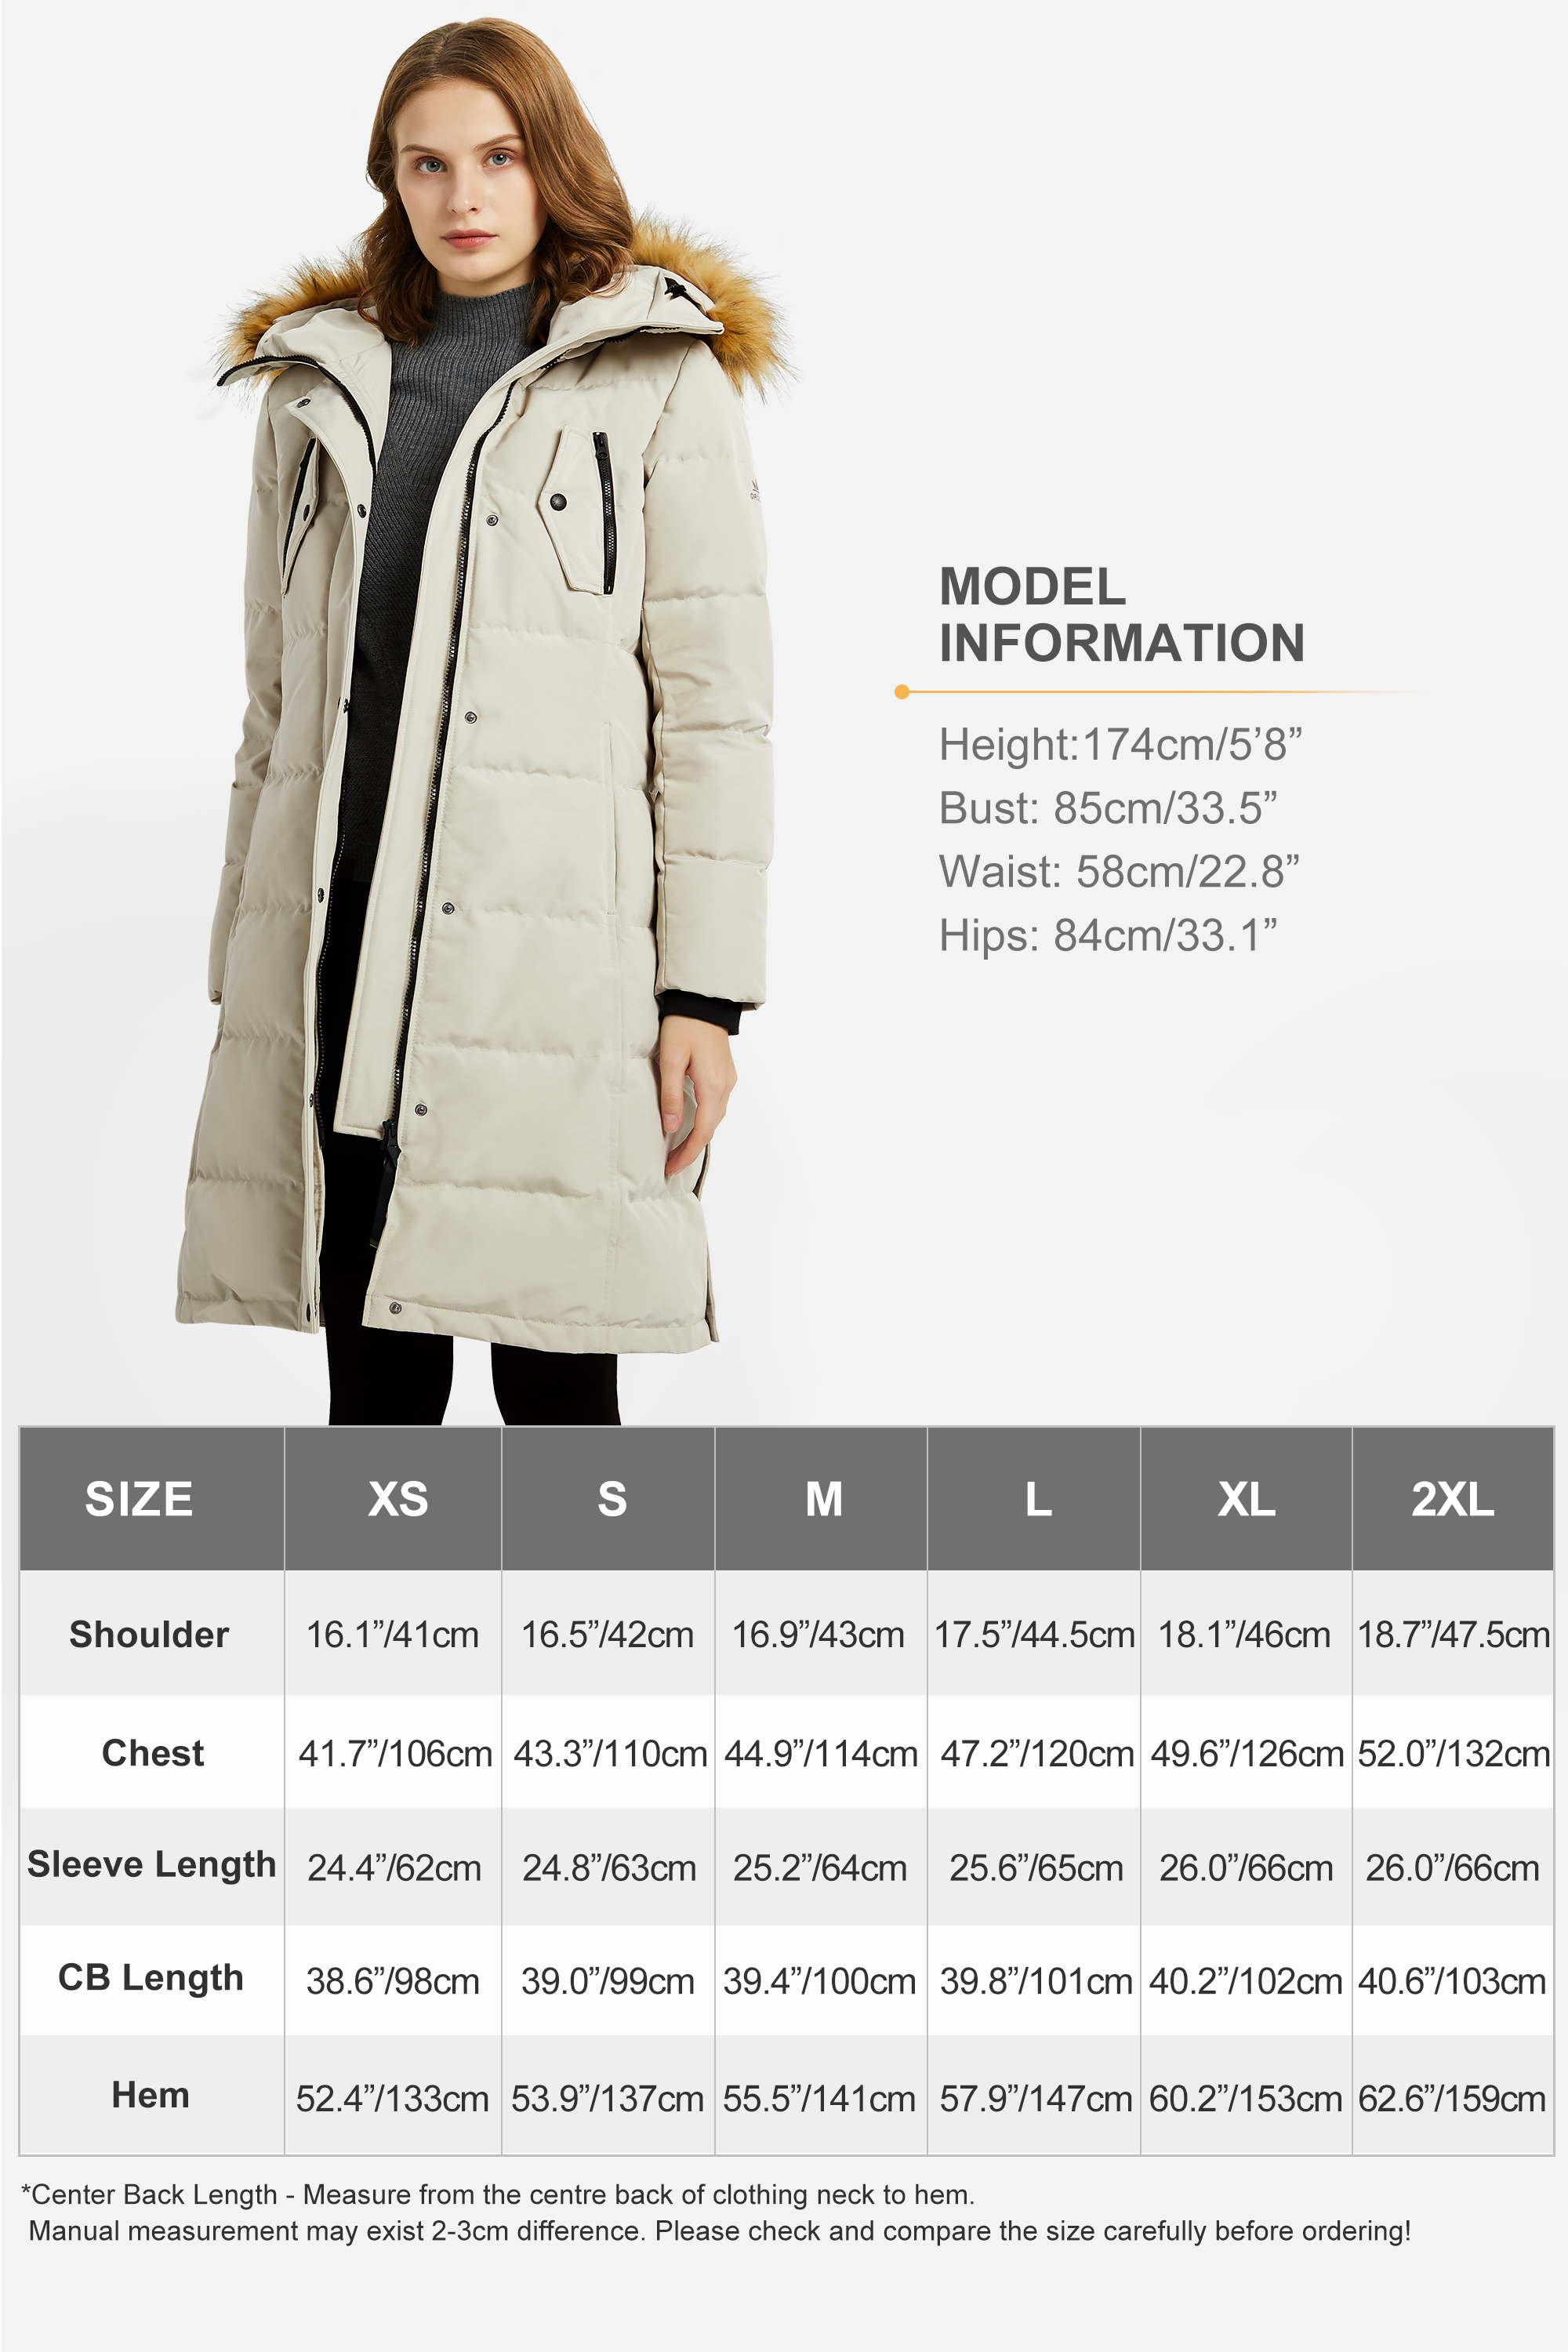 Orolay Women's Down Jacket Winter Long Coat Windproof Puffer Jacket with Fur Hood - image 5 of 5